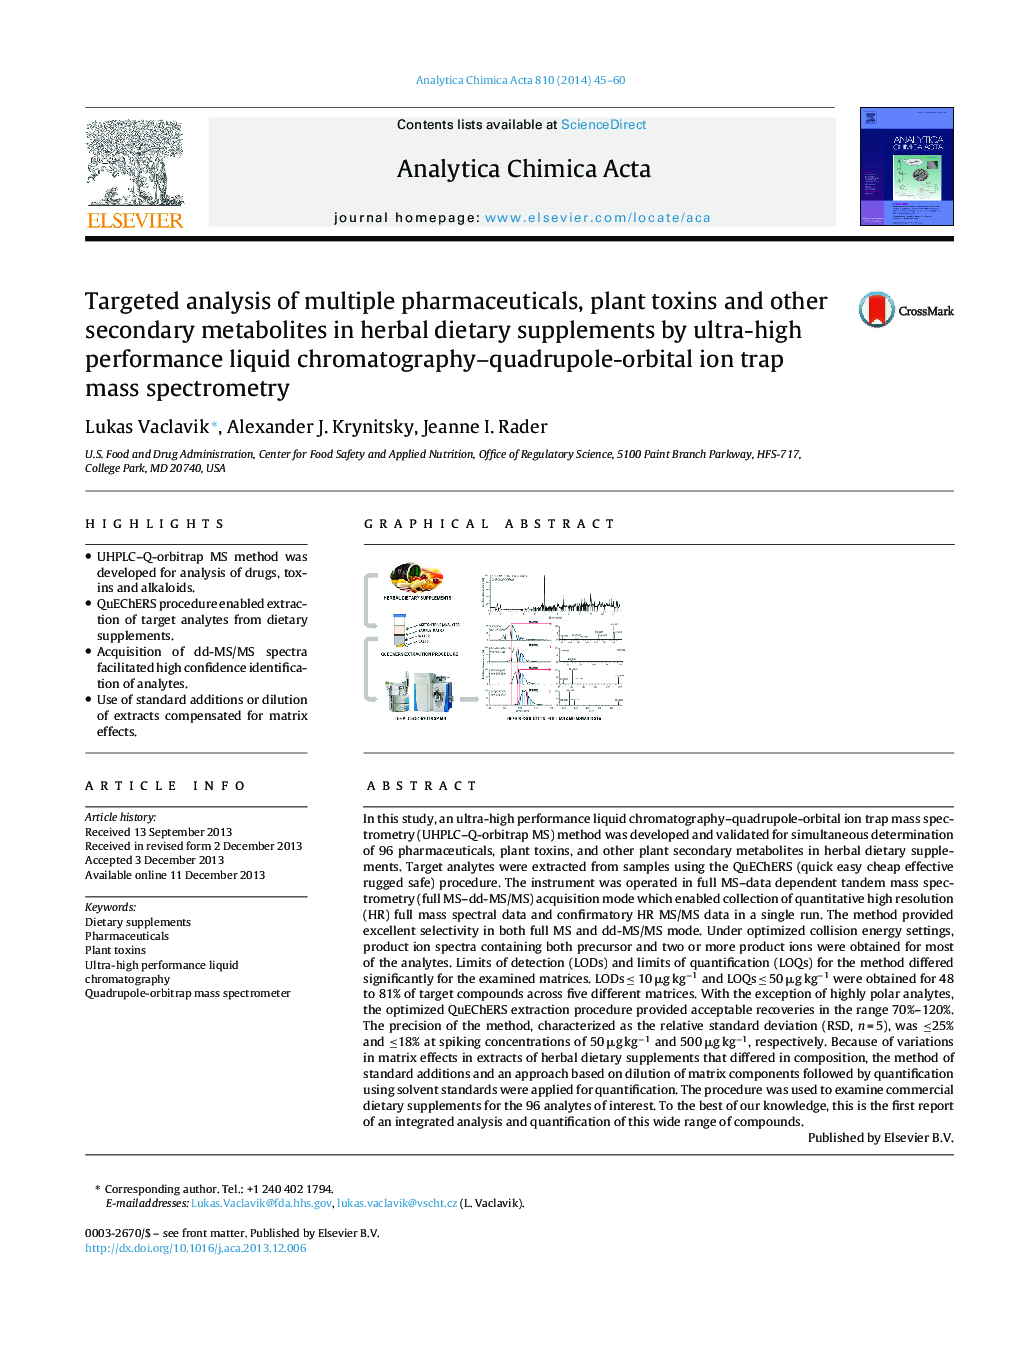 Targeted analysis of multiple pharmaceuticals, plant toxins and other secondary metabolites in herbal dietary supplements by ultra-high performance liquid chromatography–quadrupole-orbital ion trap mass spectrometry